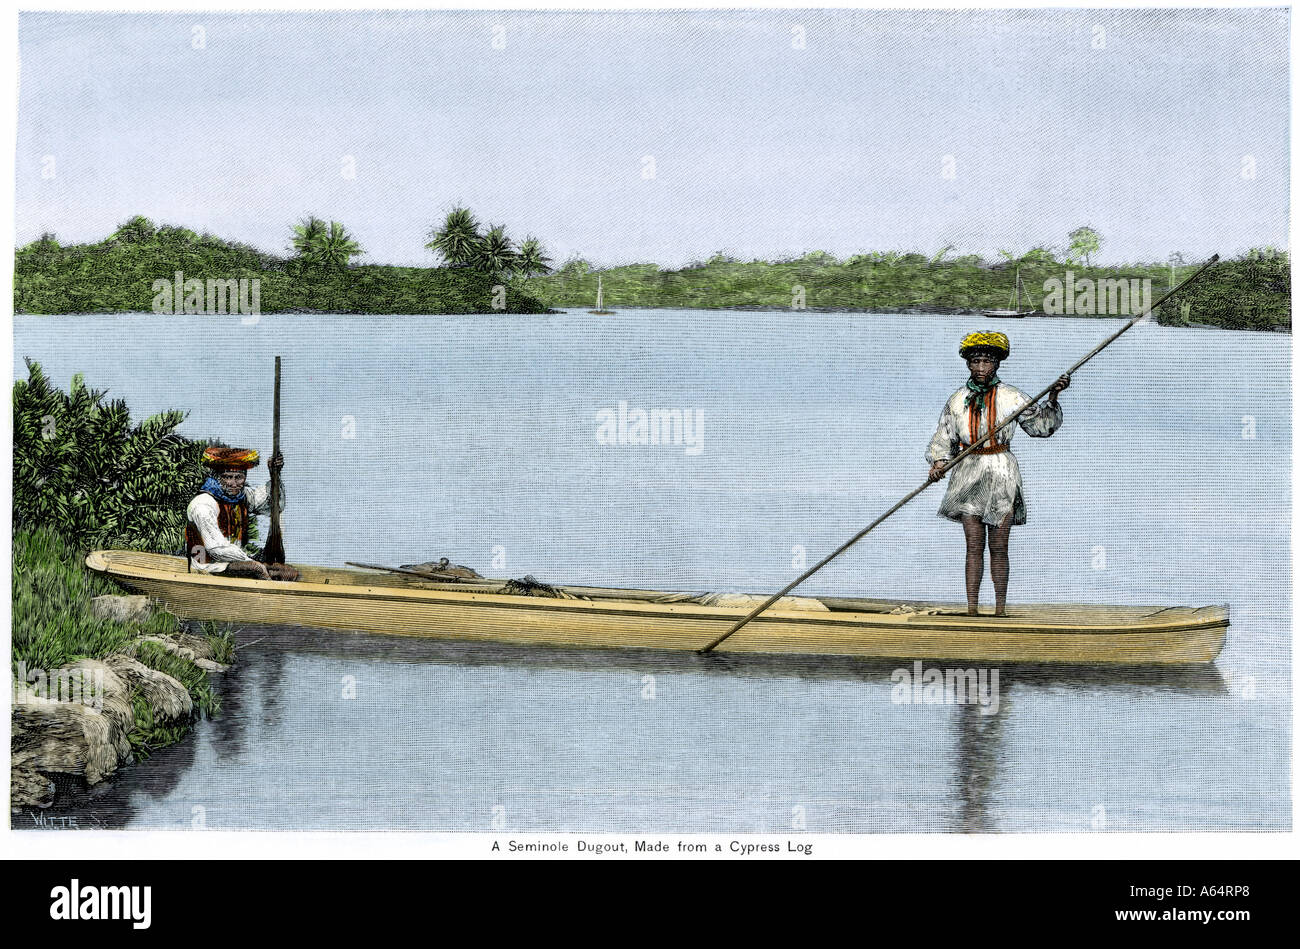 Seminole Native Americans in their dugout canoe made from a cypress log in Florida 1800s. Hand-colored woodcut Stock Photo